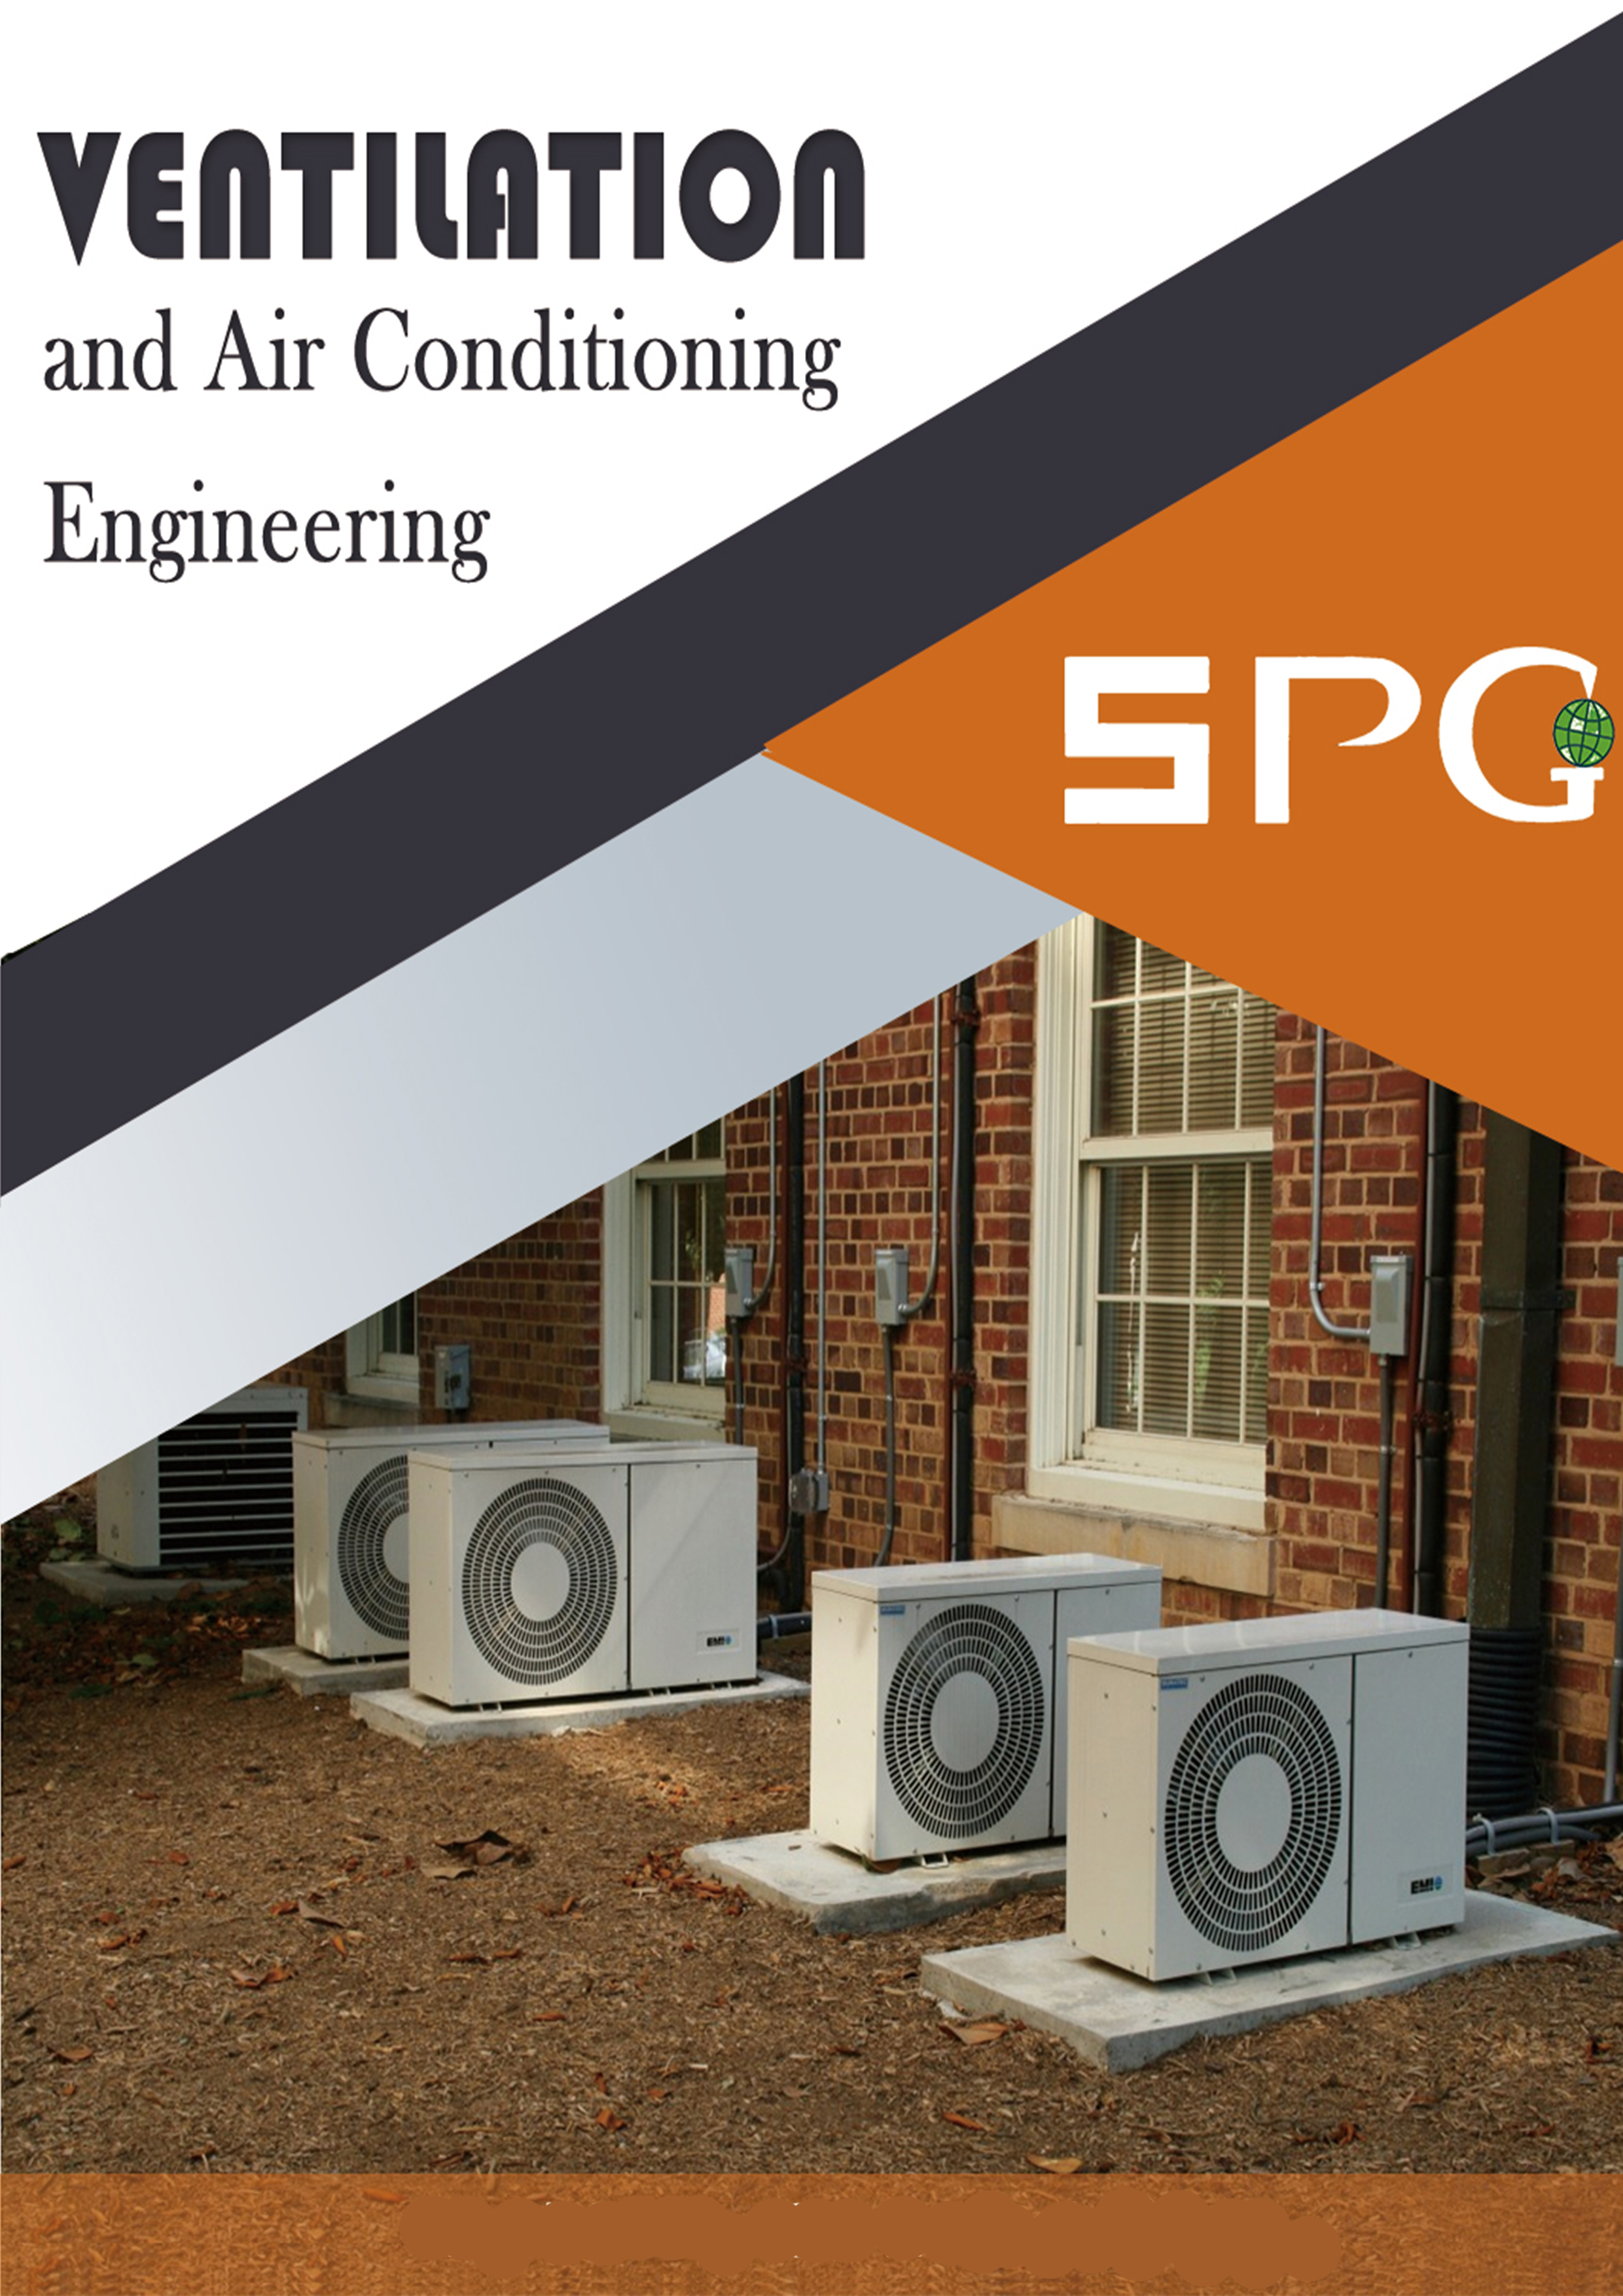 Ventilation and Air Conditioning Engineering | Scholar Publishing Group